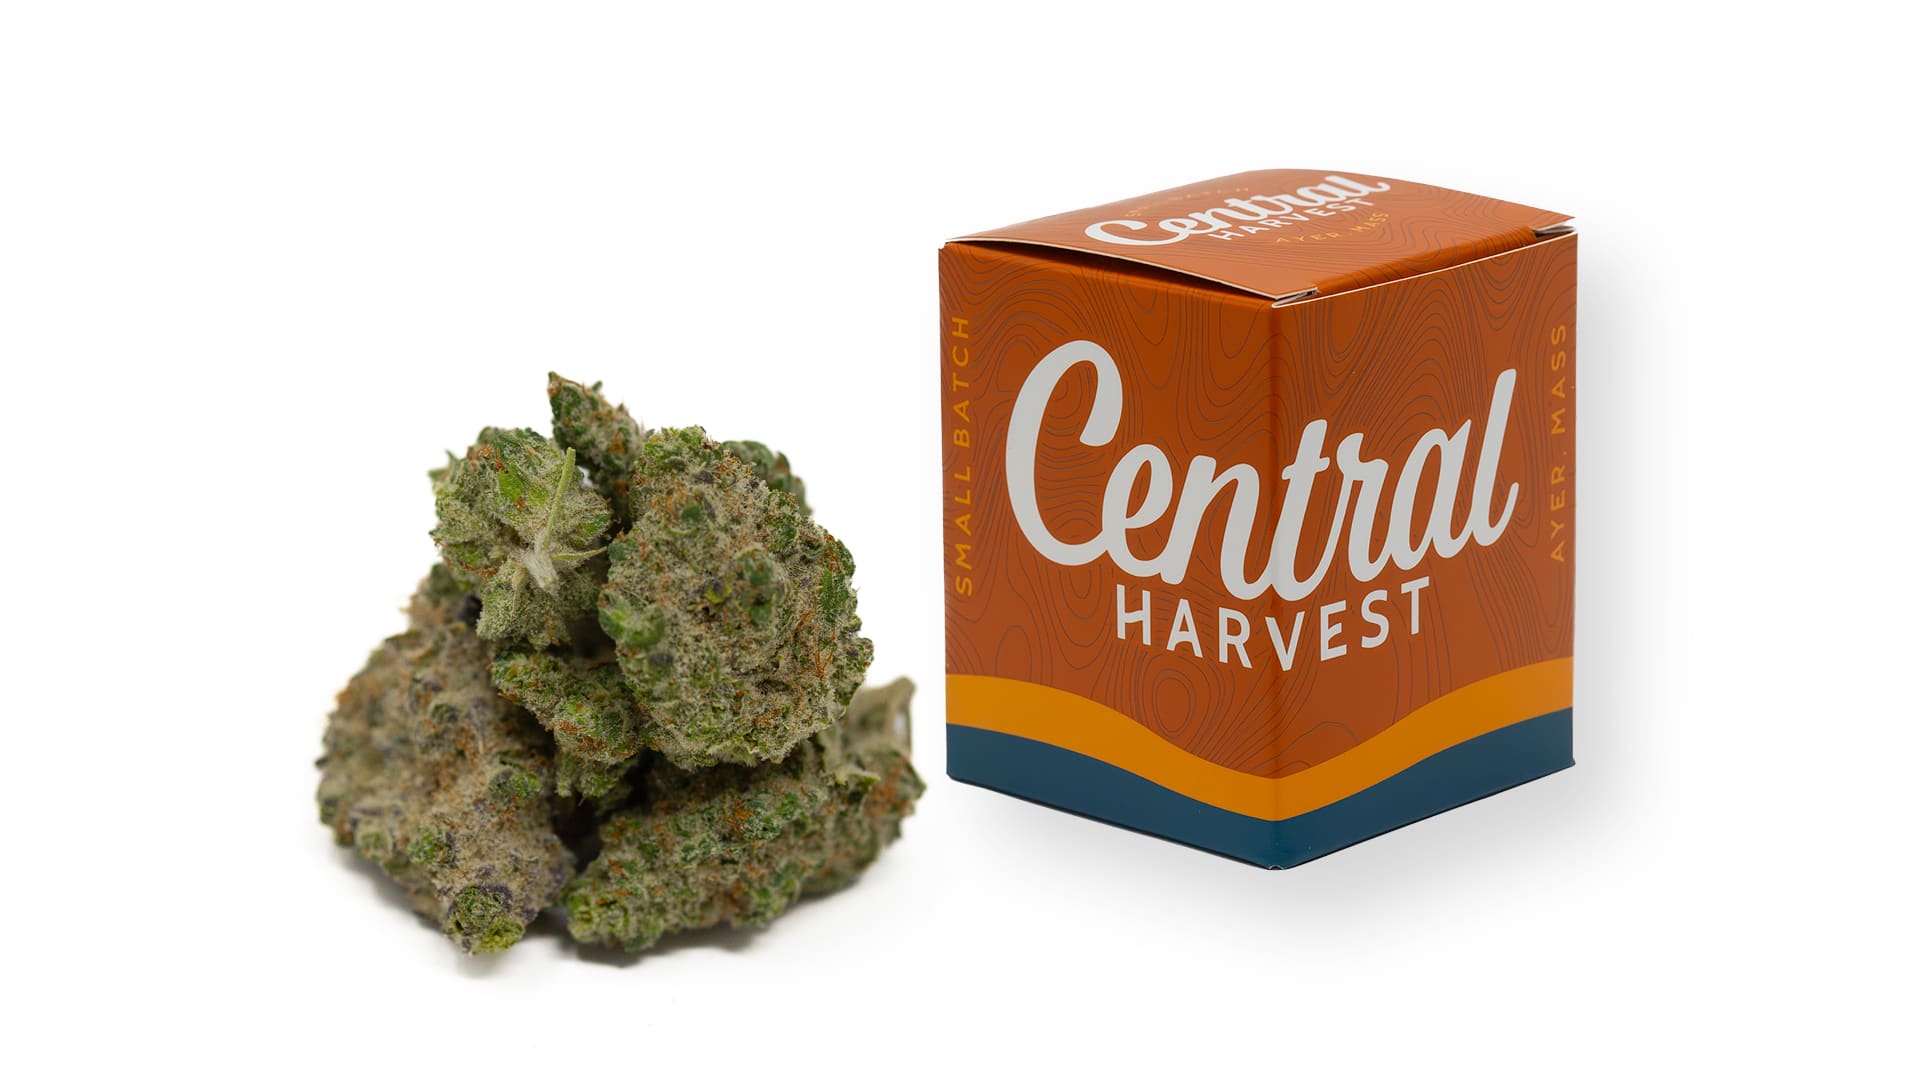 Planet of the Grapes is an Indica Cannabis Strain grown at Central Harvest